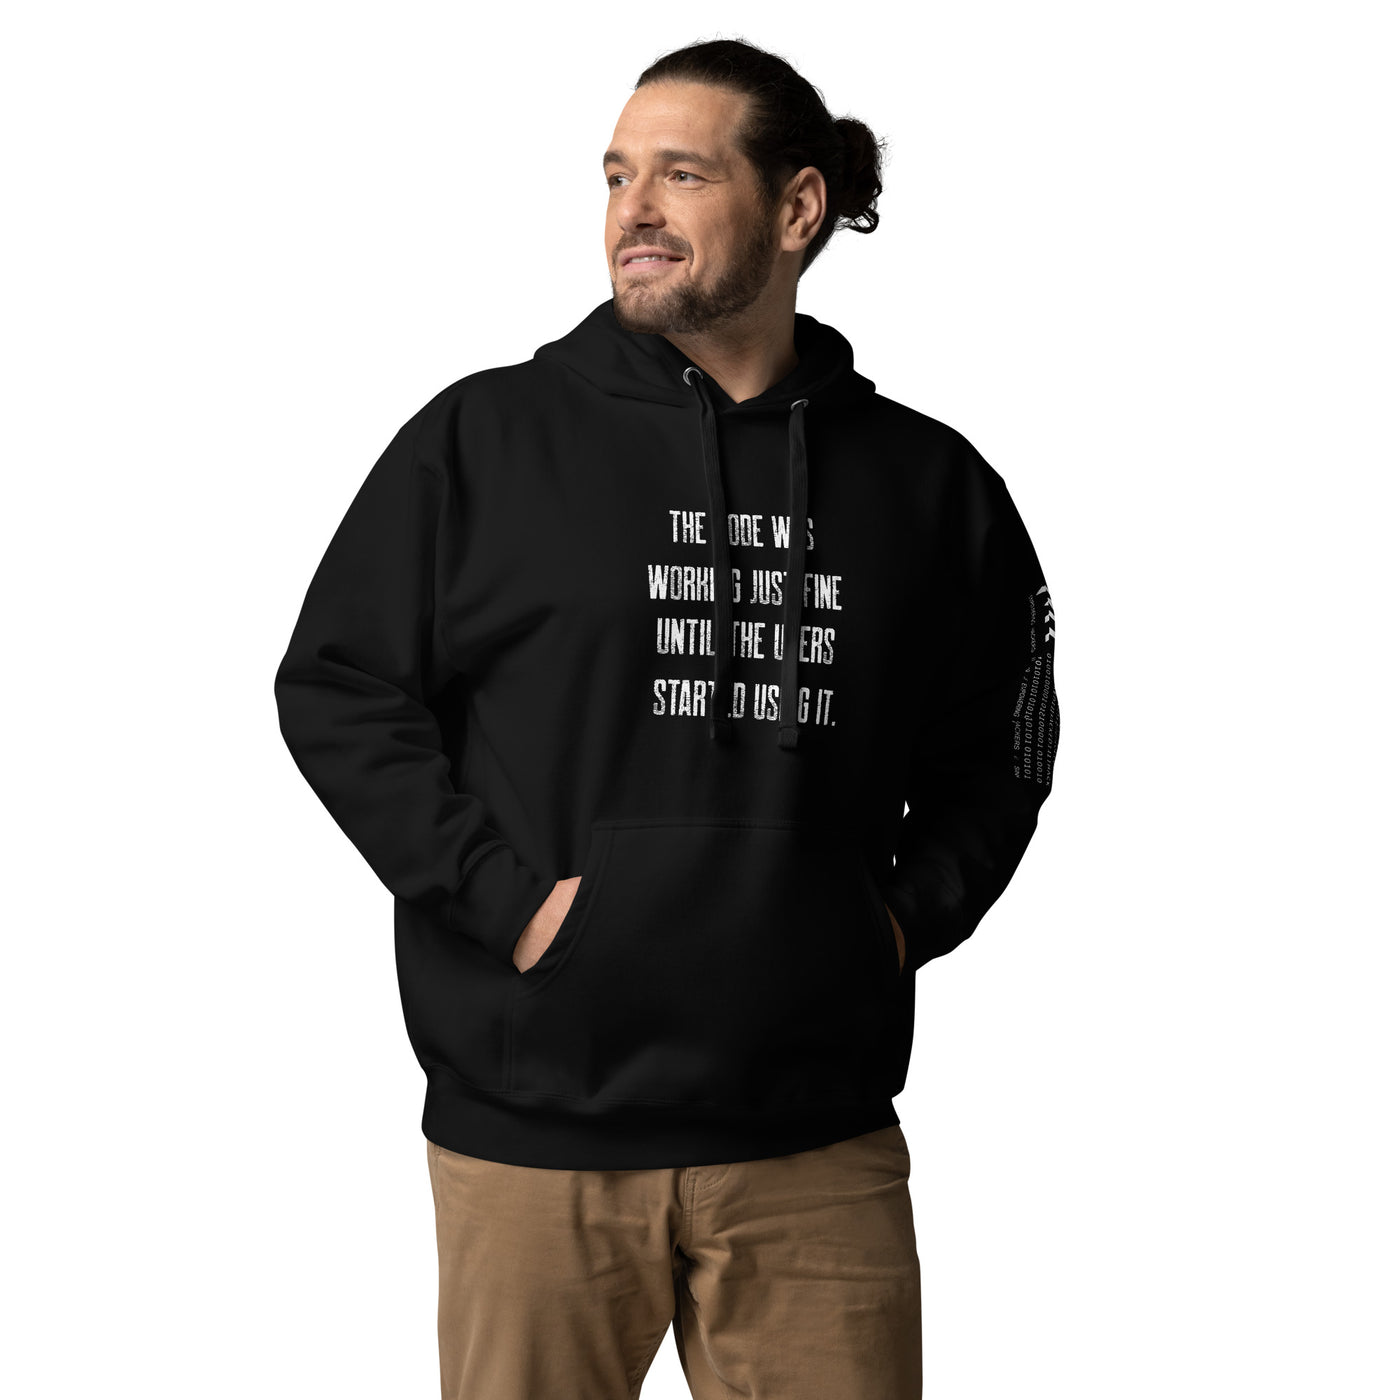 The code was working just fine until the users started using it V2 - Unisex Hoodie